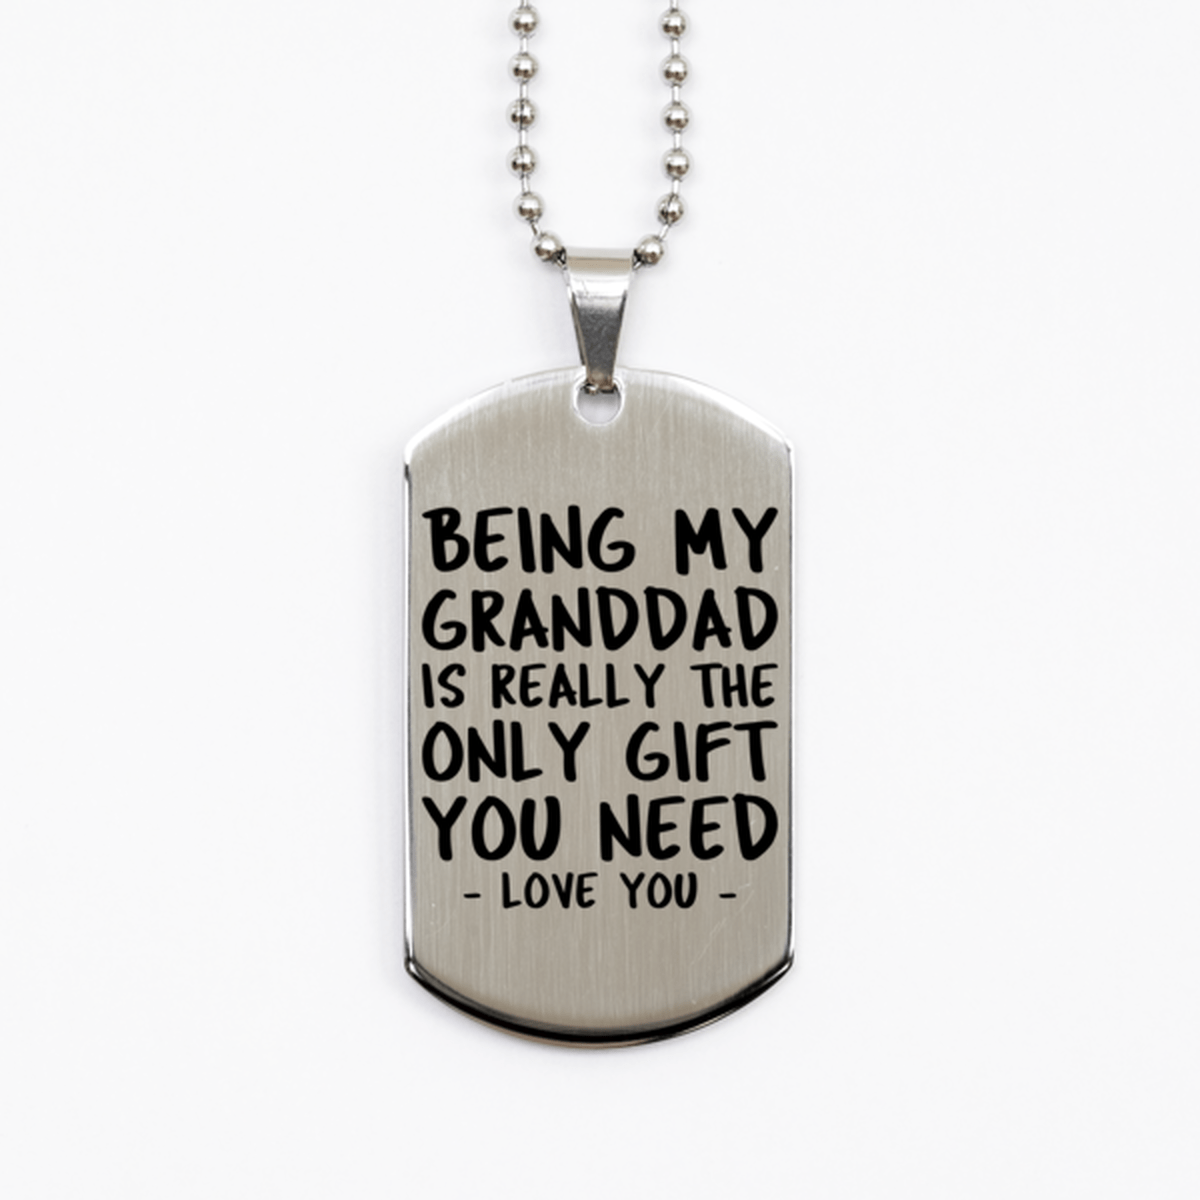 Funny Granddad Silver Dog Tag Necklace, Being My Granddad Is Really the Only Gift You Need, Best Birthday Gifts for Granddad